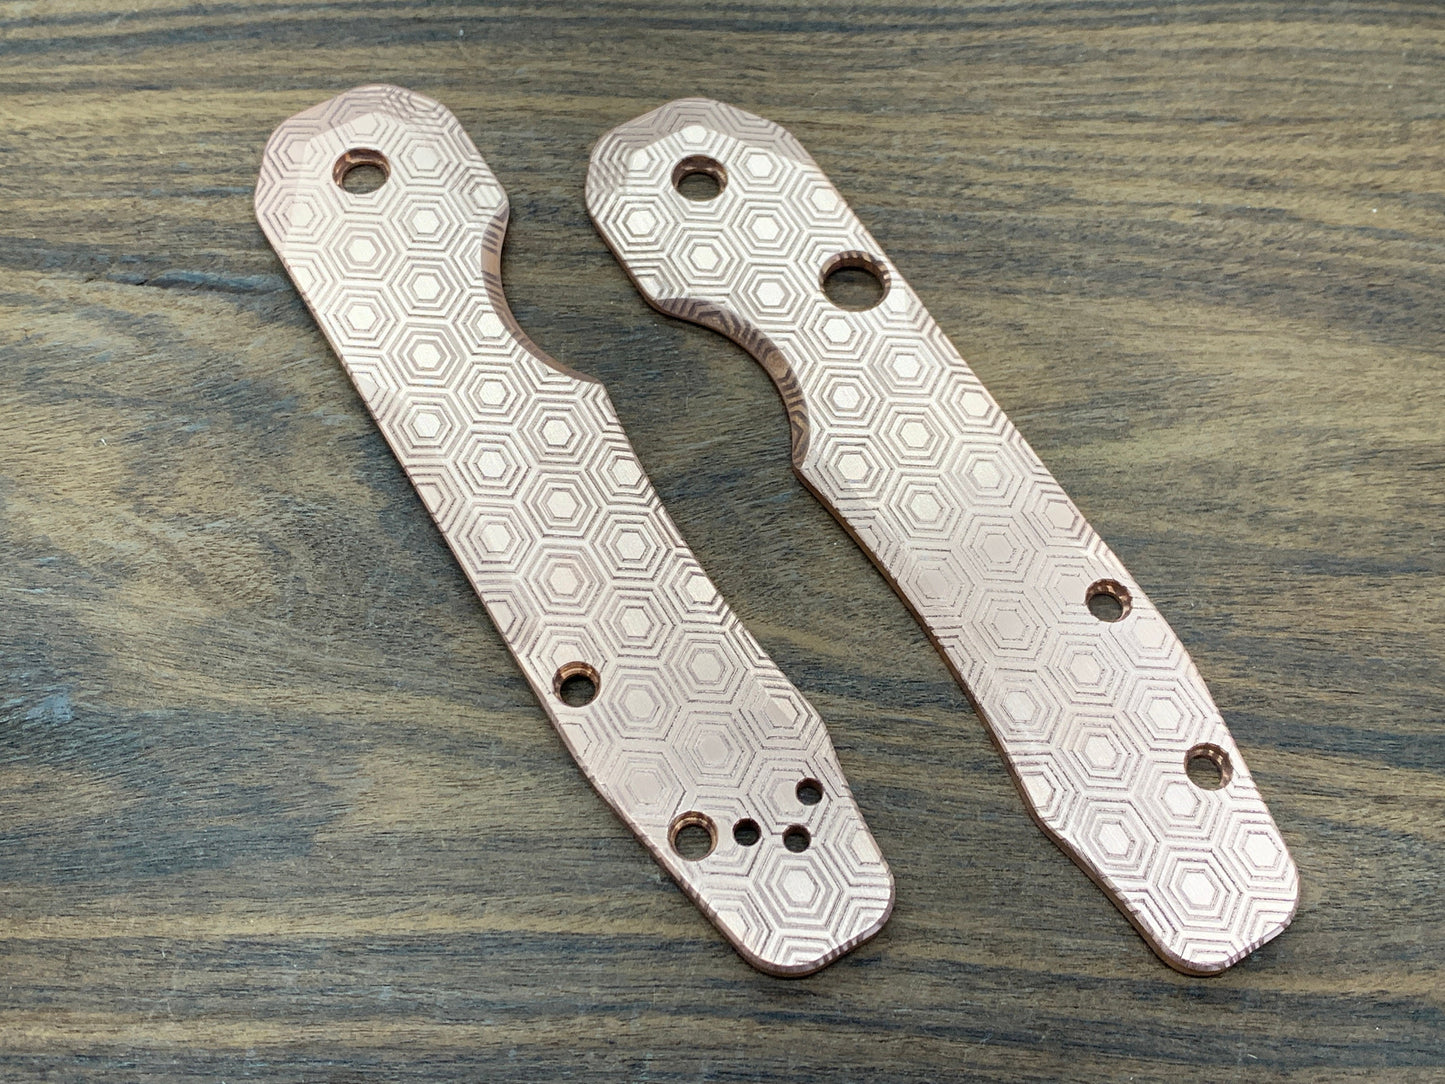 HONEYCOMB Copper Scales for Spyderco SMOCK